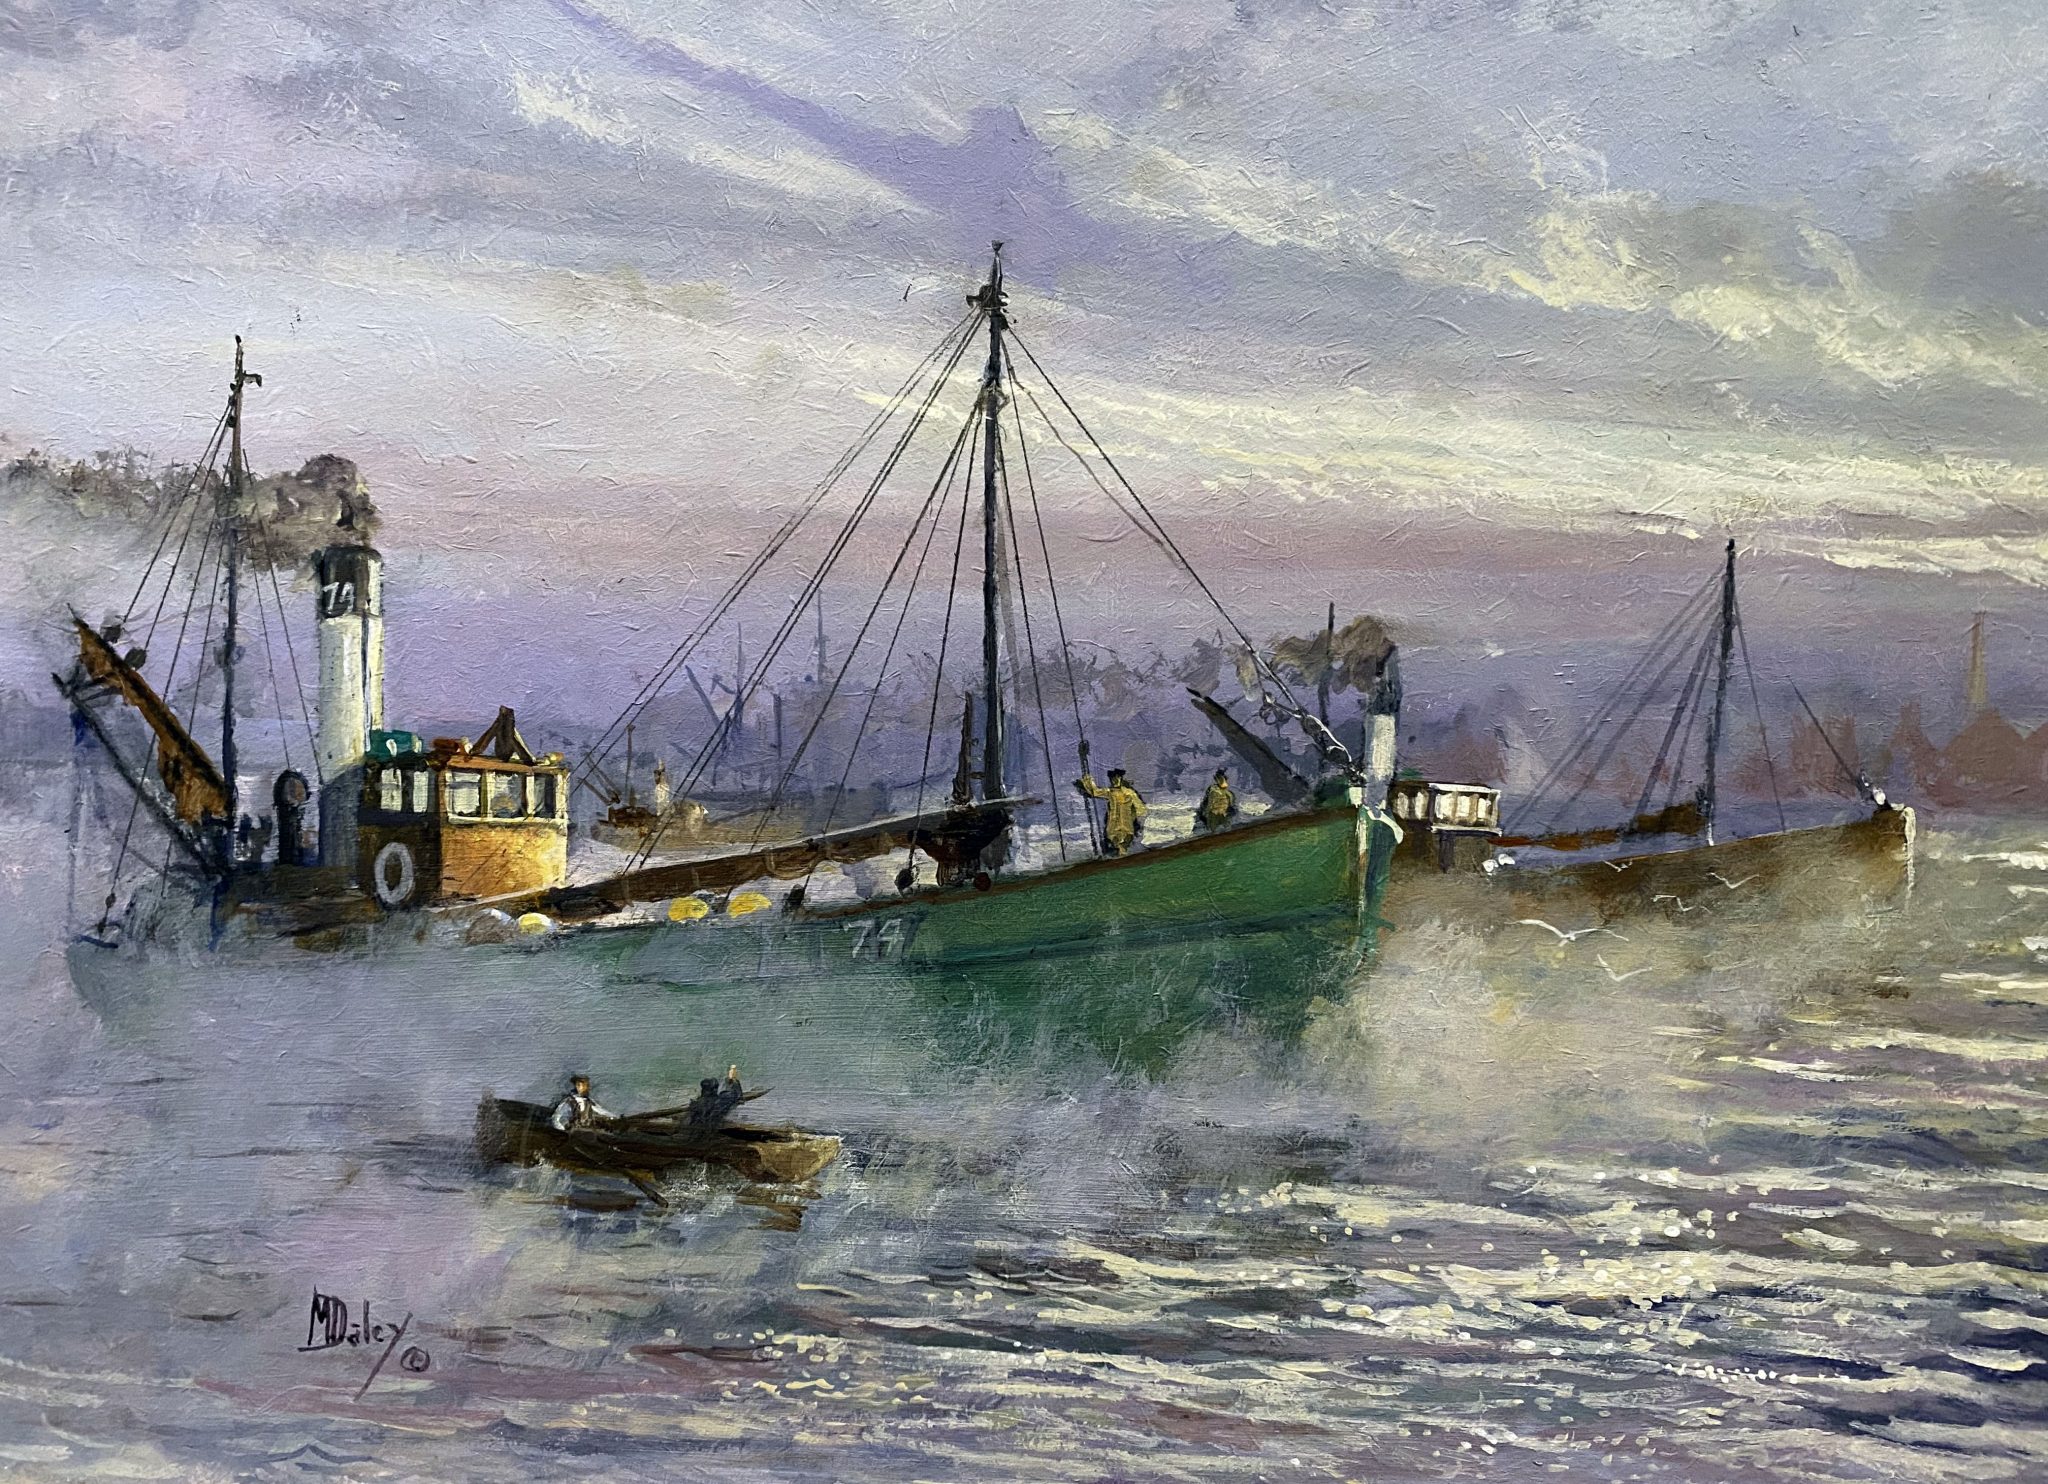 Outbound for the Herring by artist Mike Daley